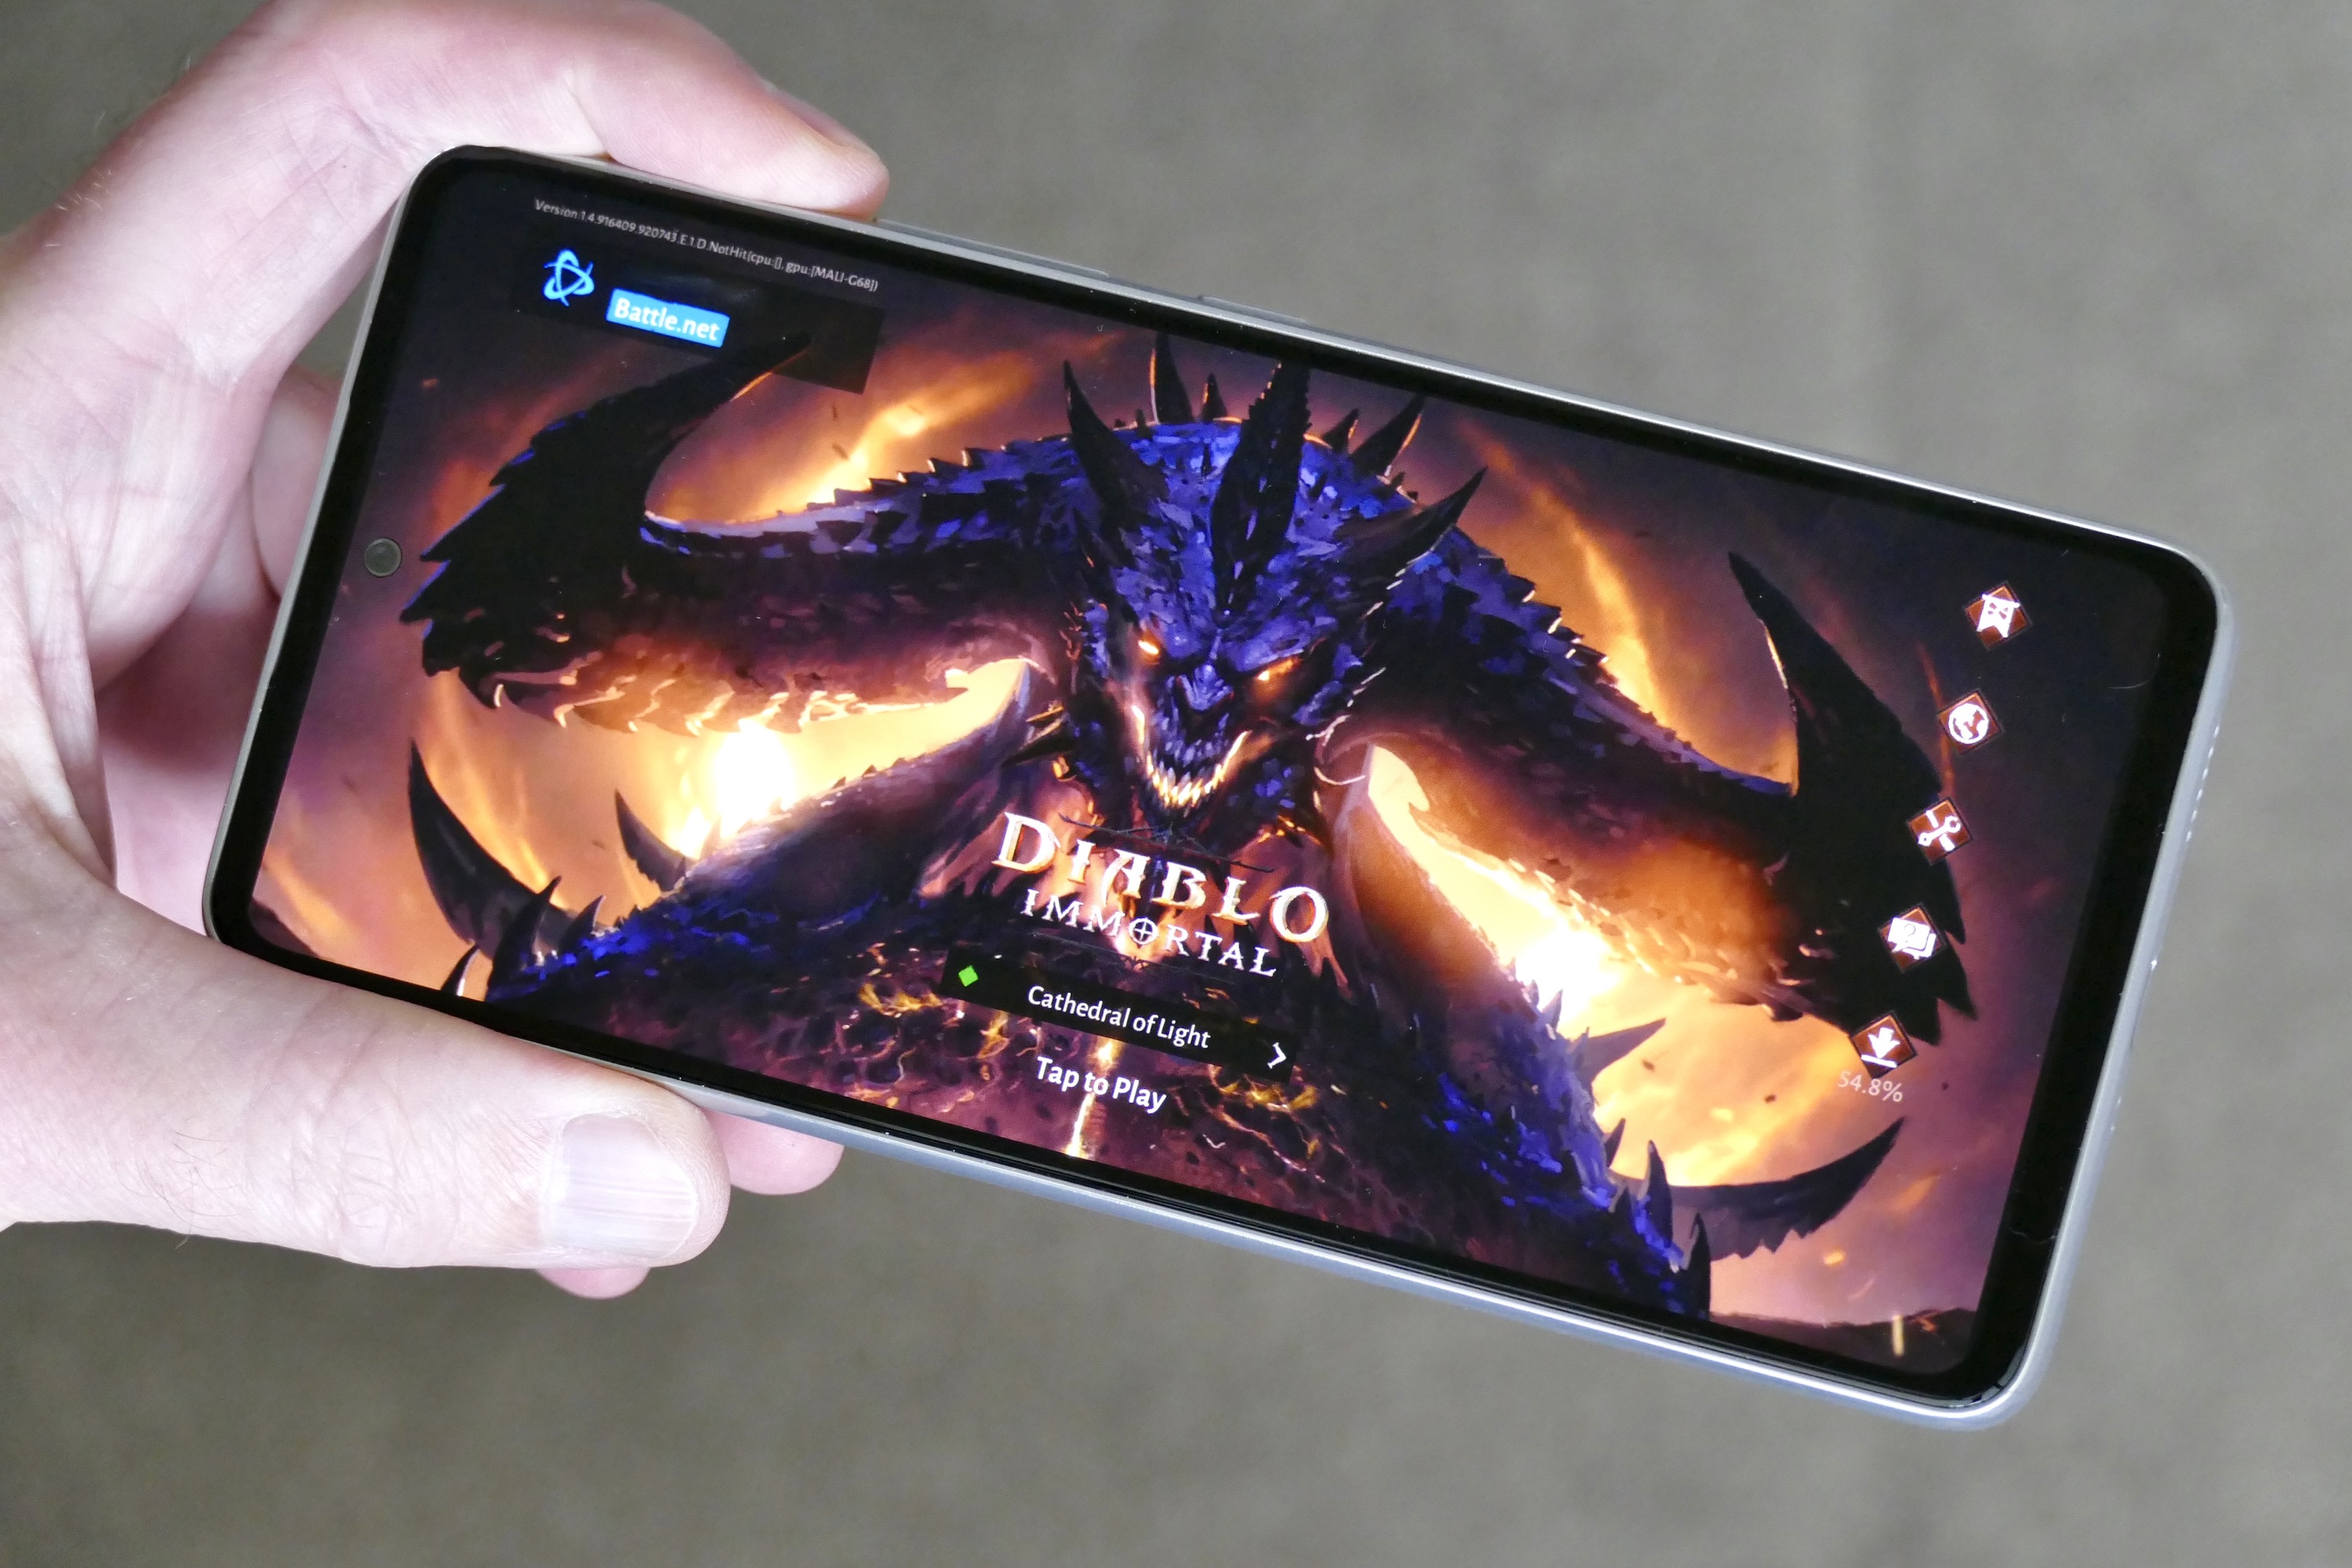 The Galaxy A53 plays Diablo Immortal better than envisioned